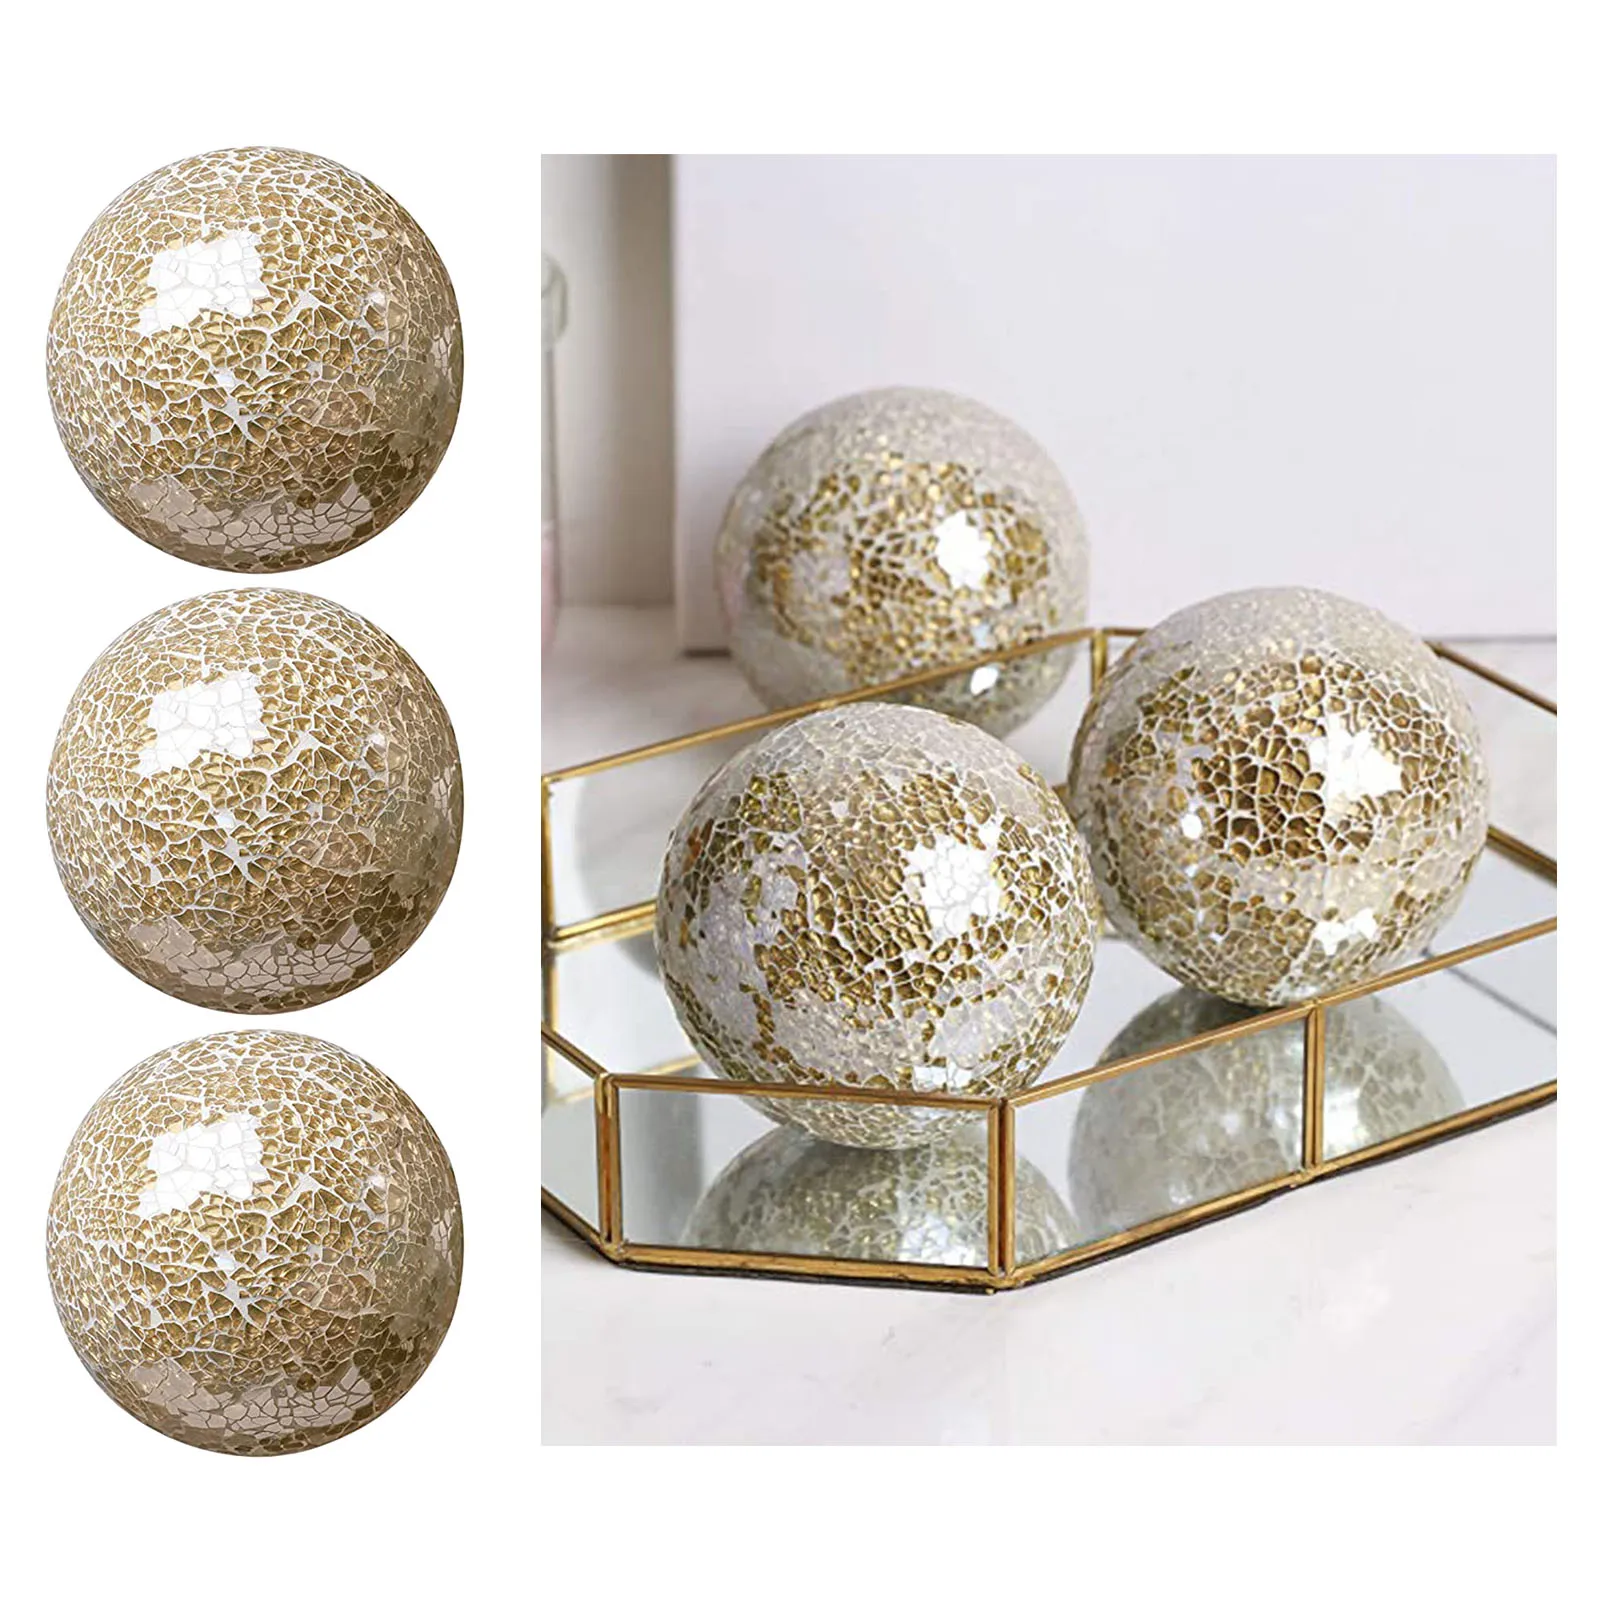 3pcs Decorative Glass Mosaic Mirror Balls 10cm Home Sphere Ball Ornaments for Living Room Table Centerpiece Decorations